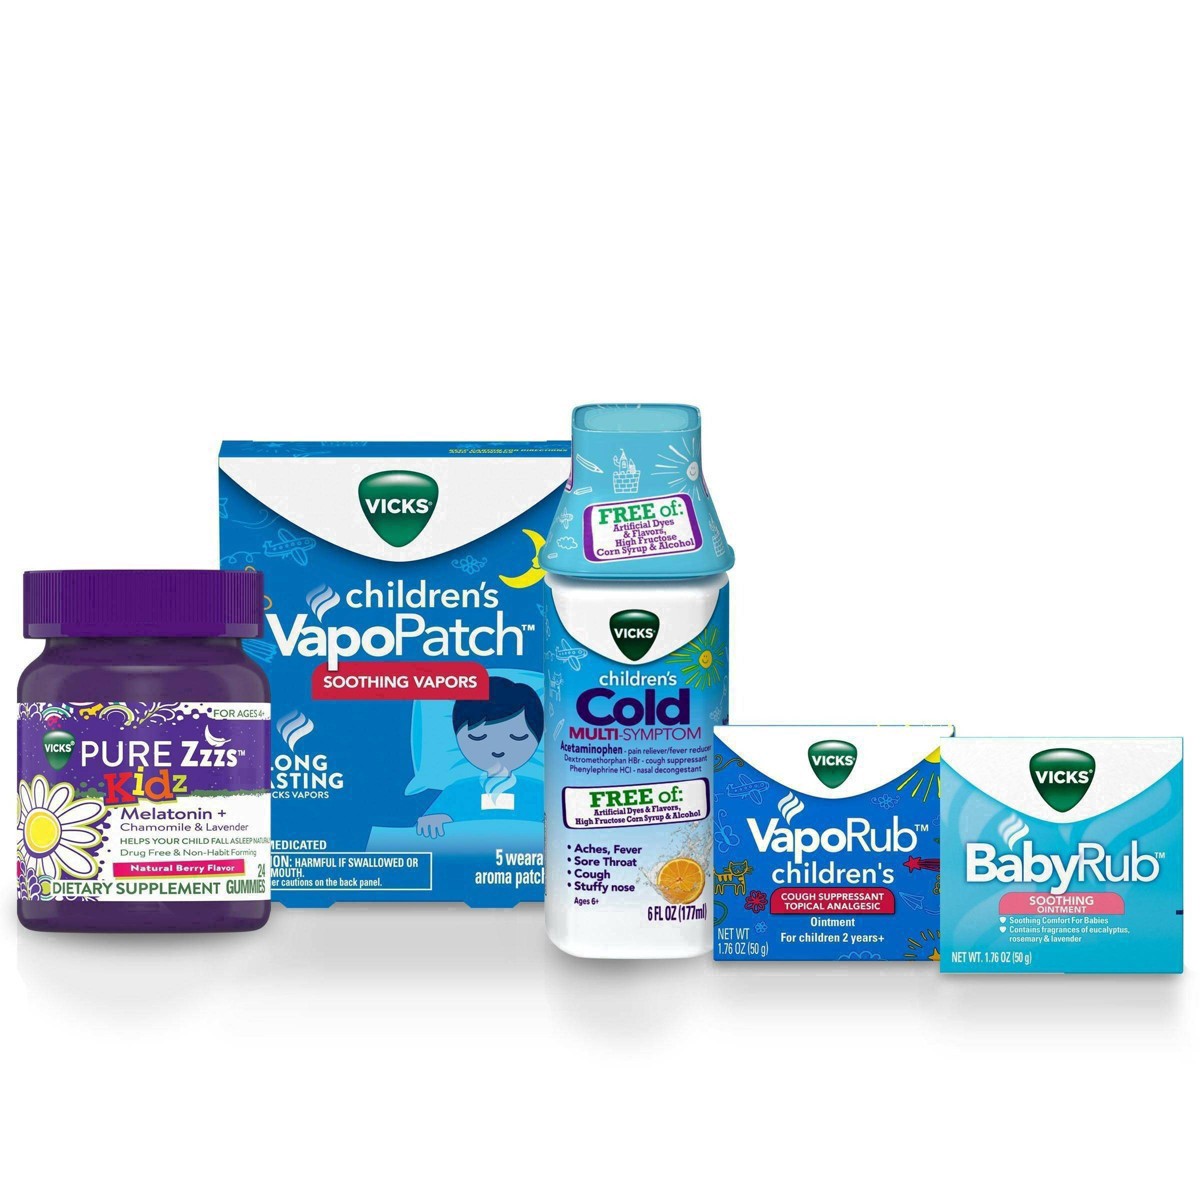 slide 18 of 37, Vicks Children's VapoPatch with Long Lasting Soothing Vapors - Menthol - 5ct, 5 ct